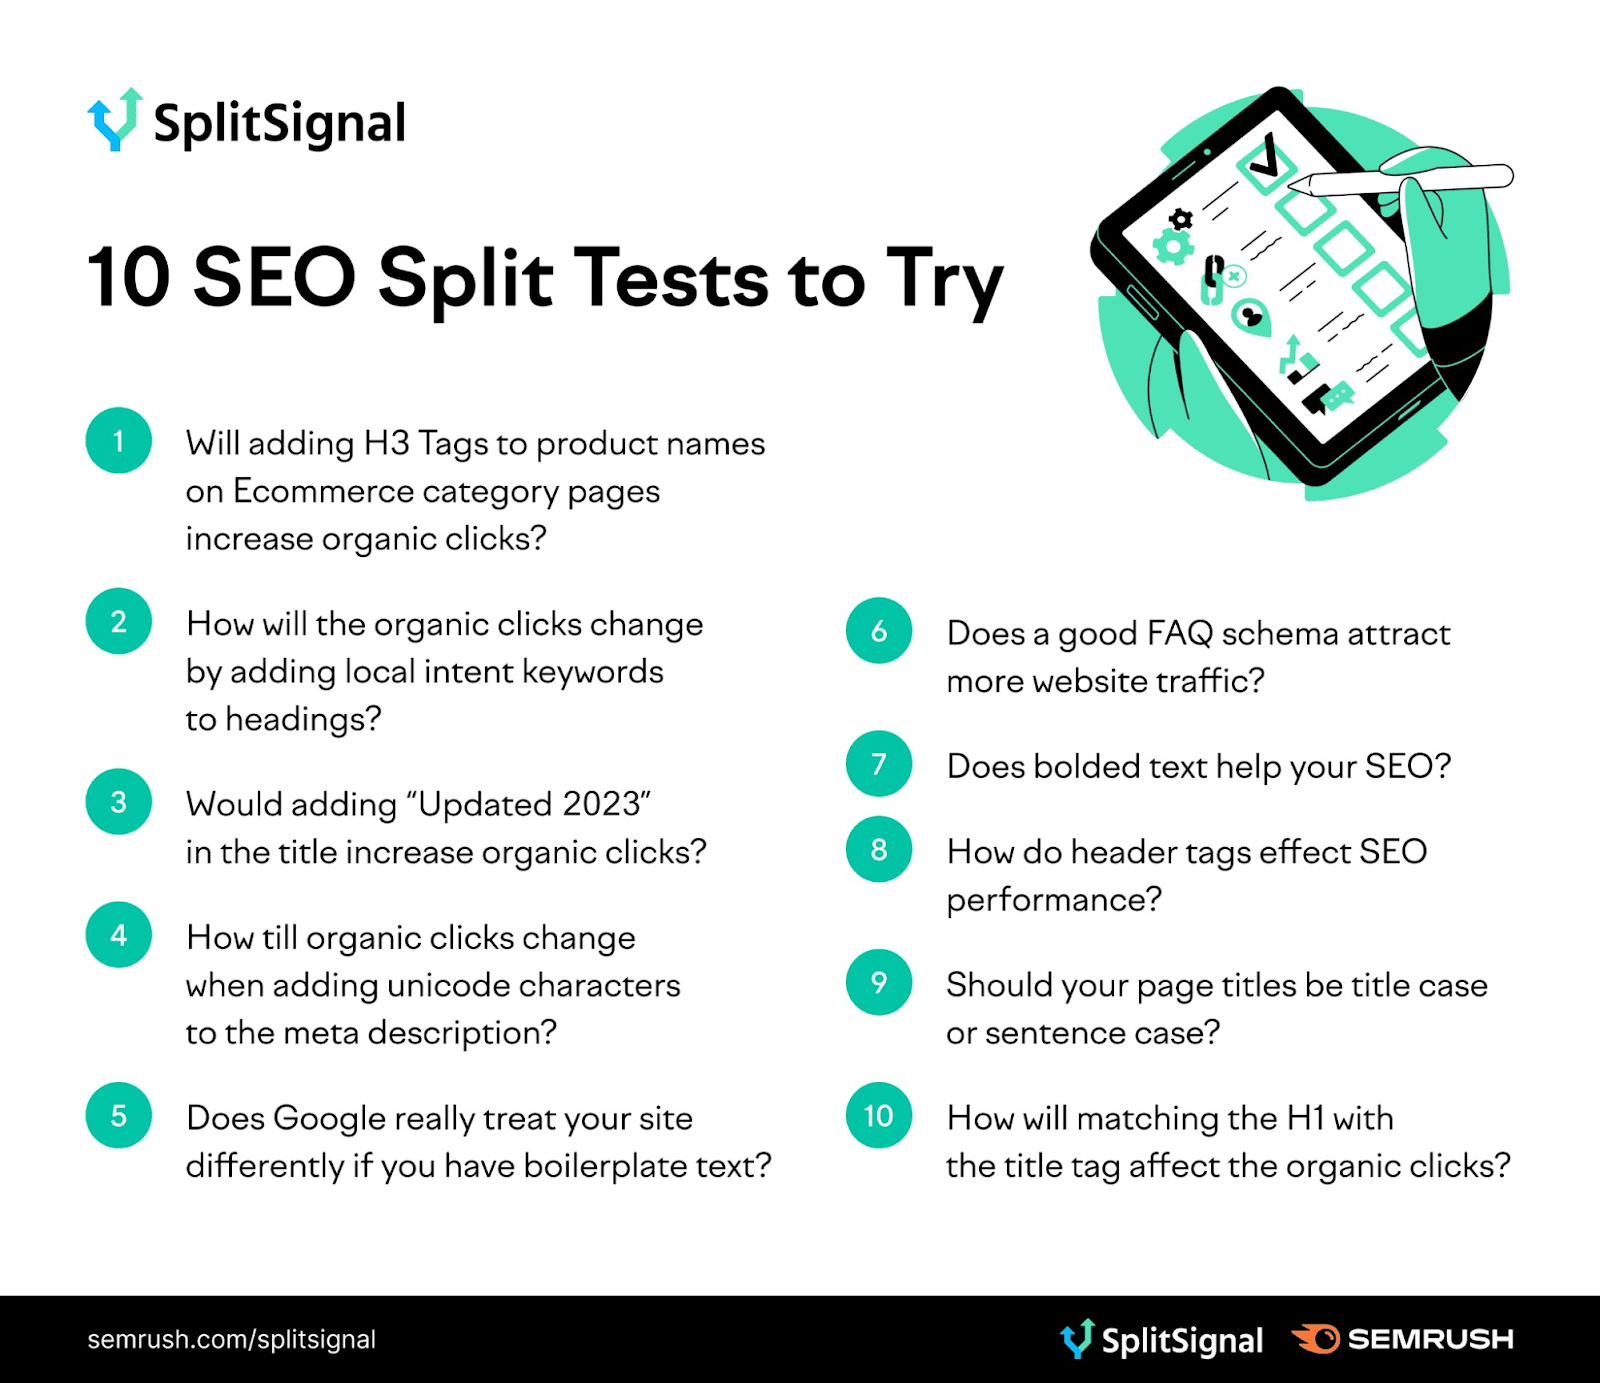 An infographic listing 10 SEO split tests to try with SplitSignal